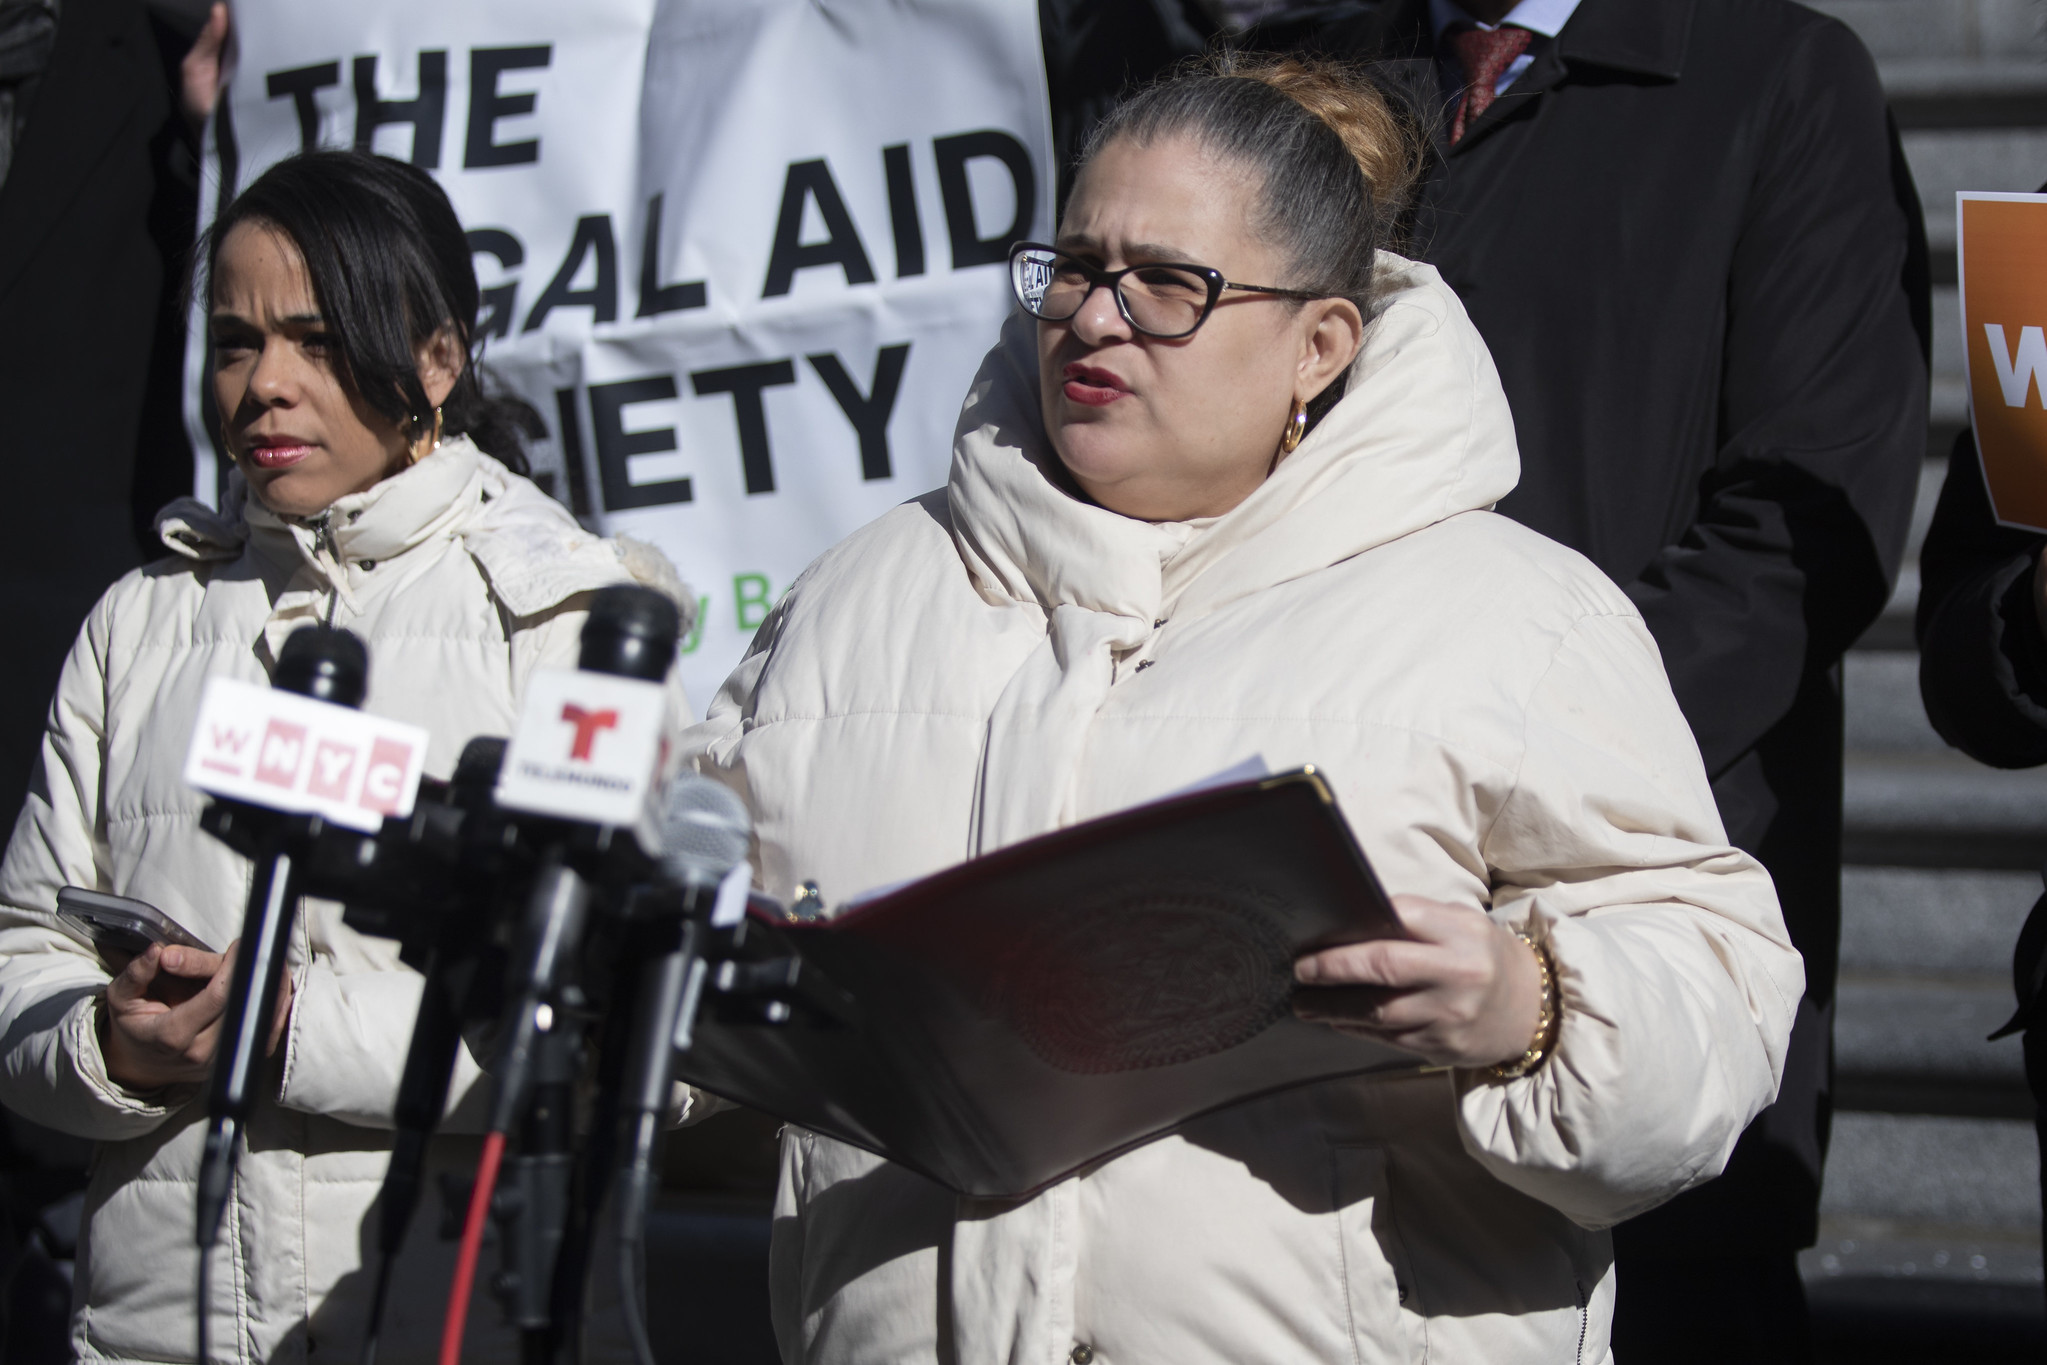 Councilmember Diana Ayala, in a cream winter puffer, speaks into microphones as a Legal Aid Society banner is shown behind her.